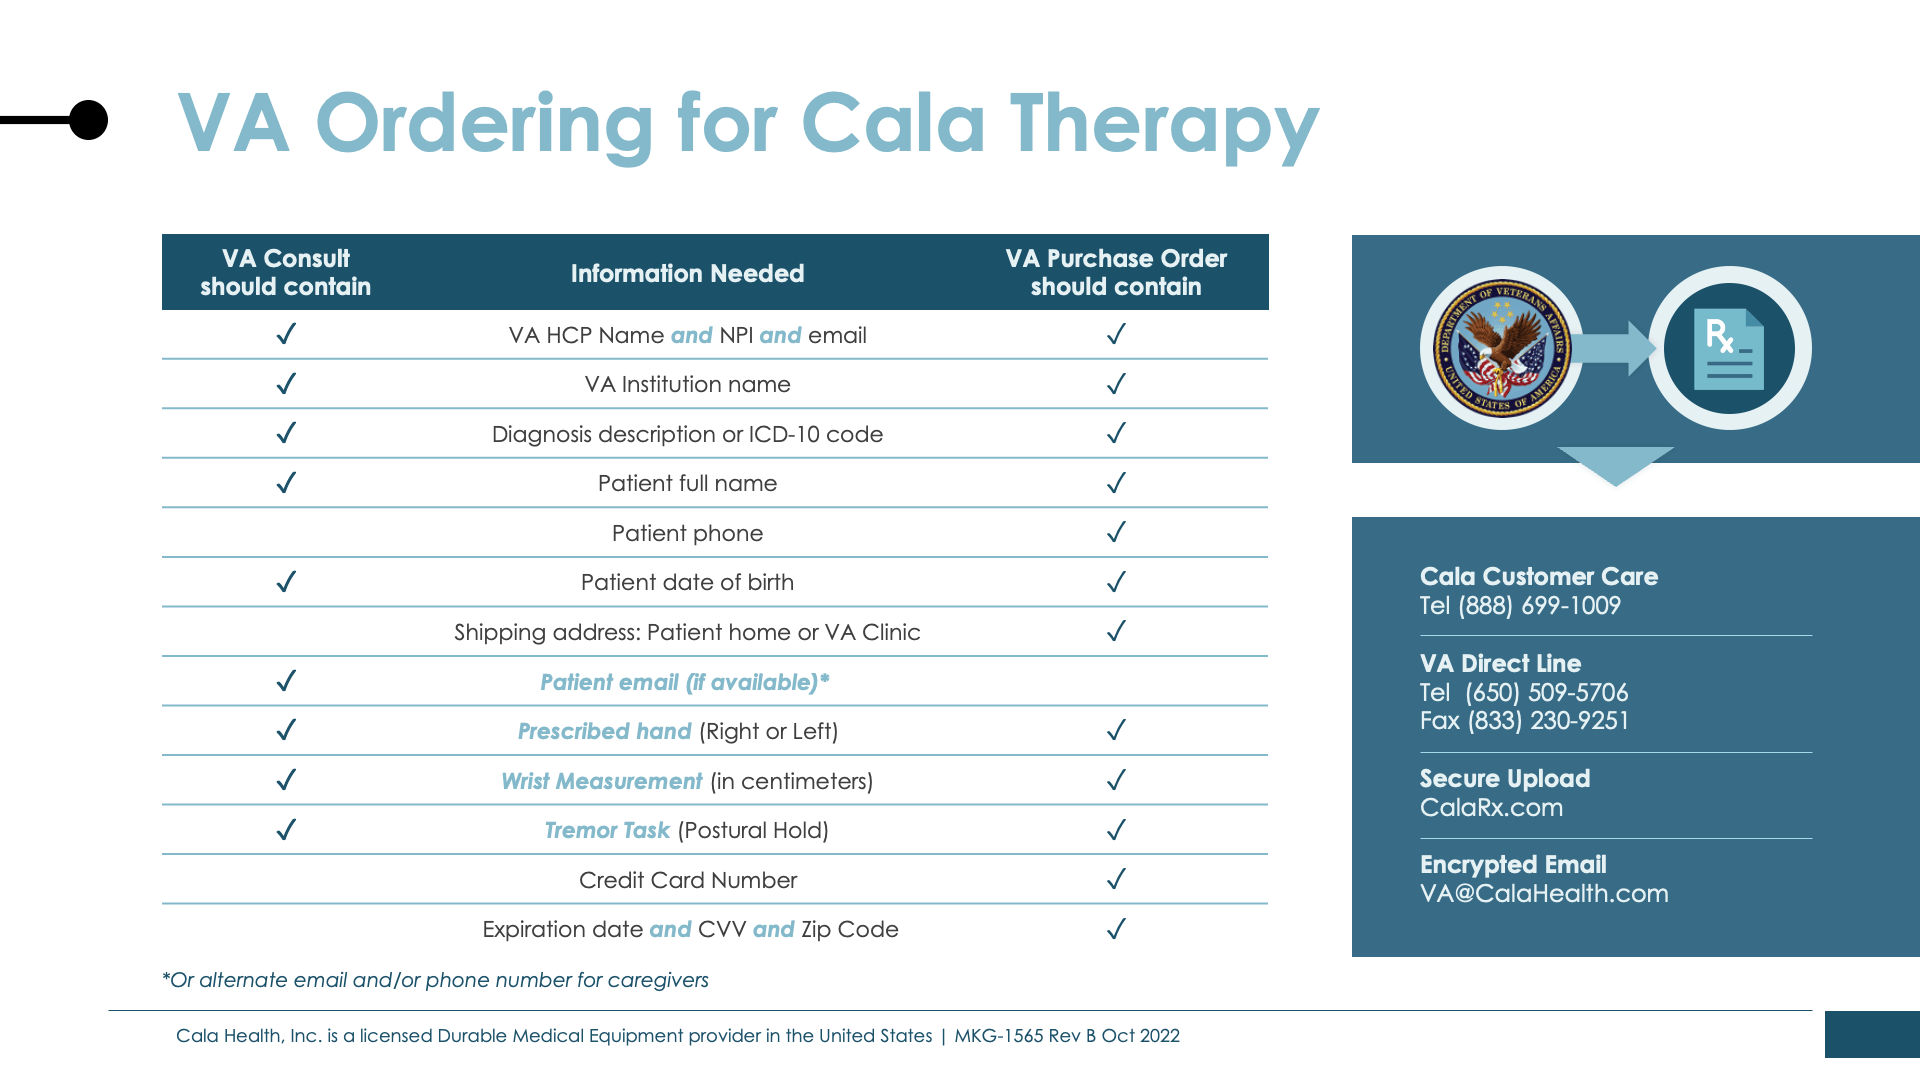 VA orderping process for Cala Therapy